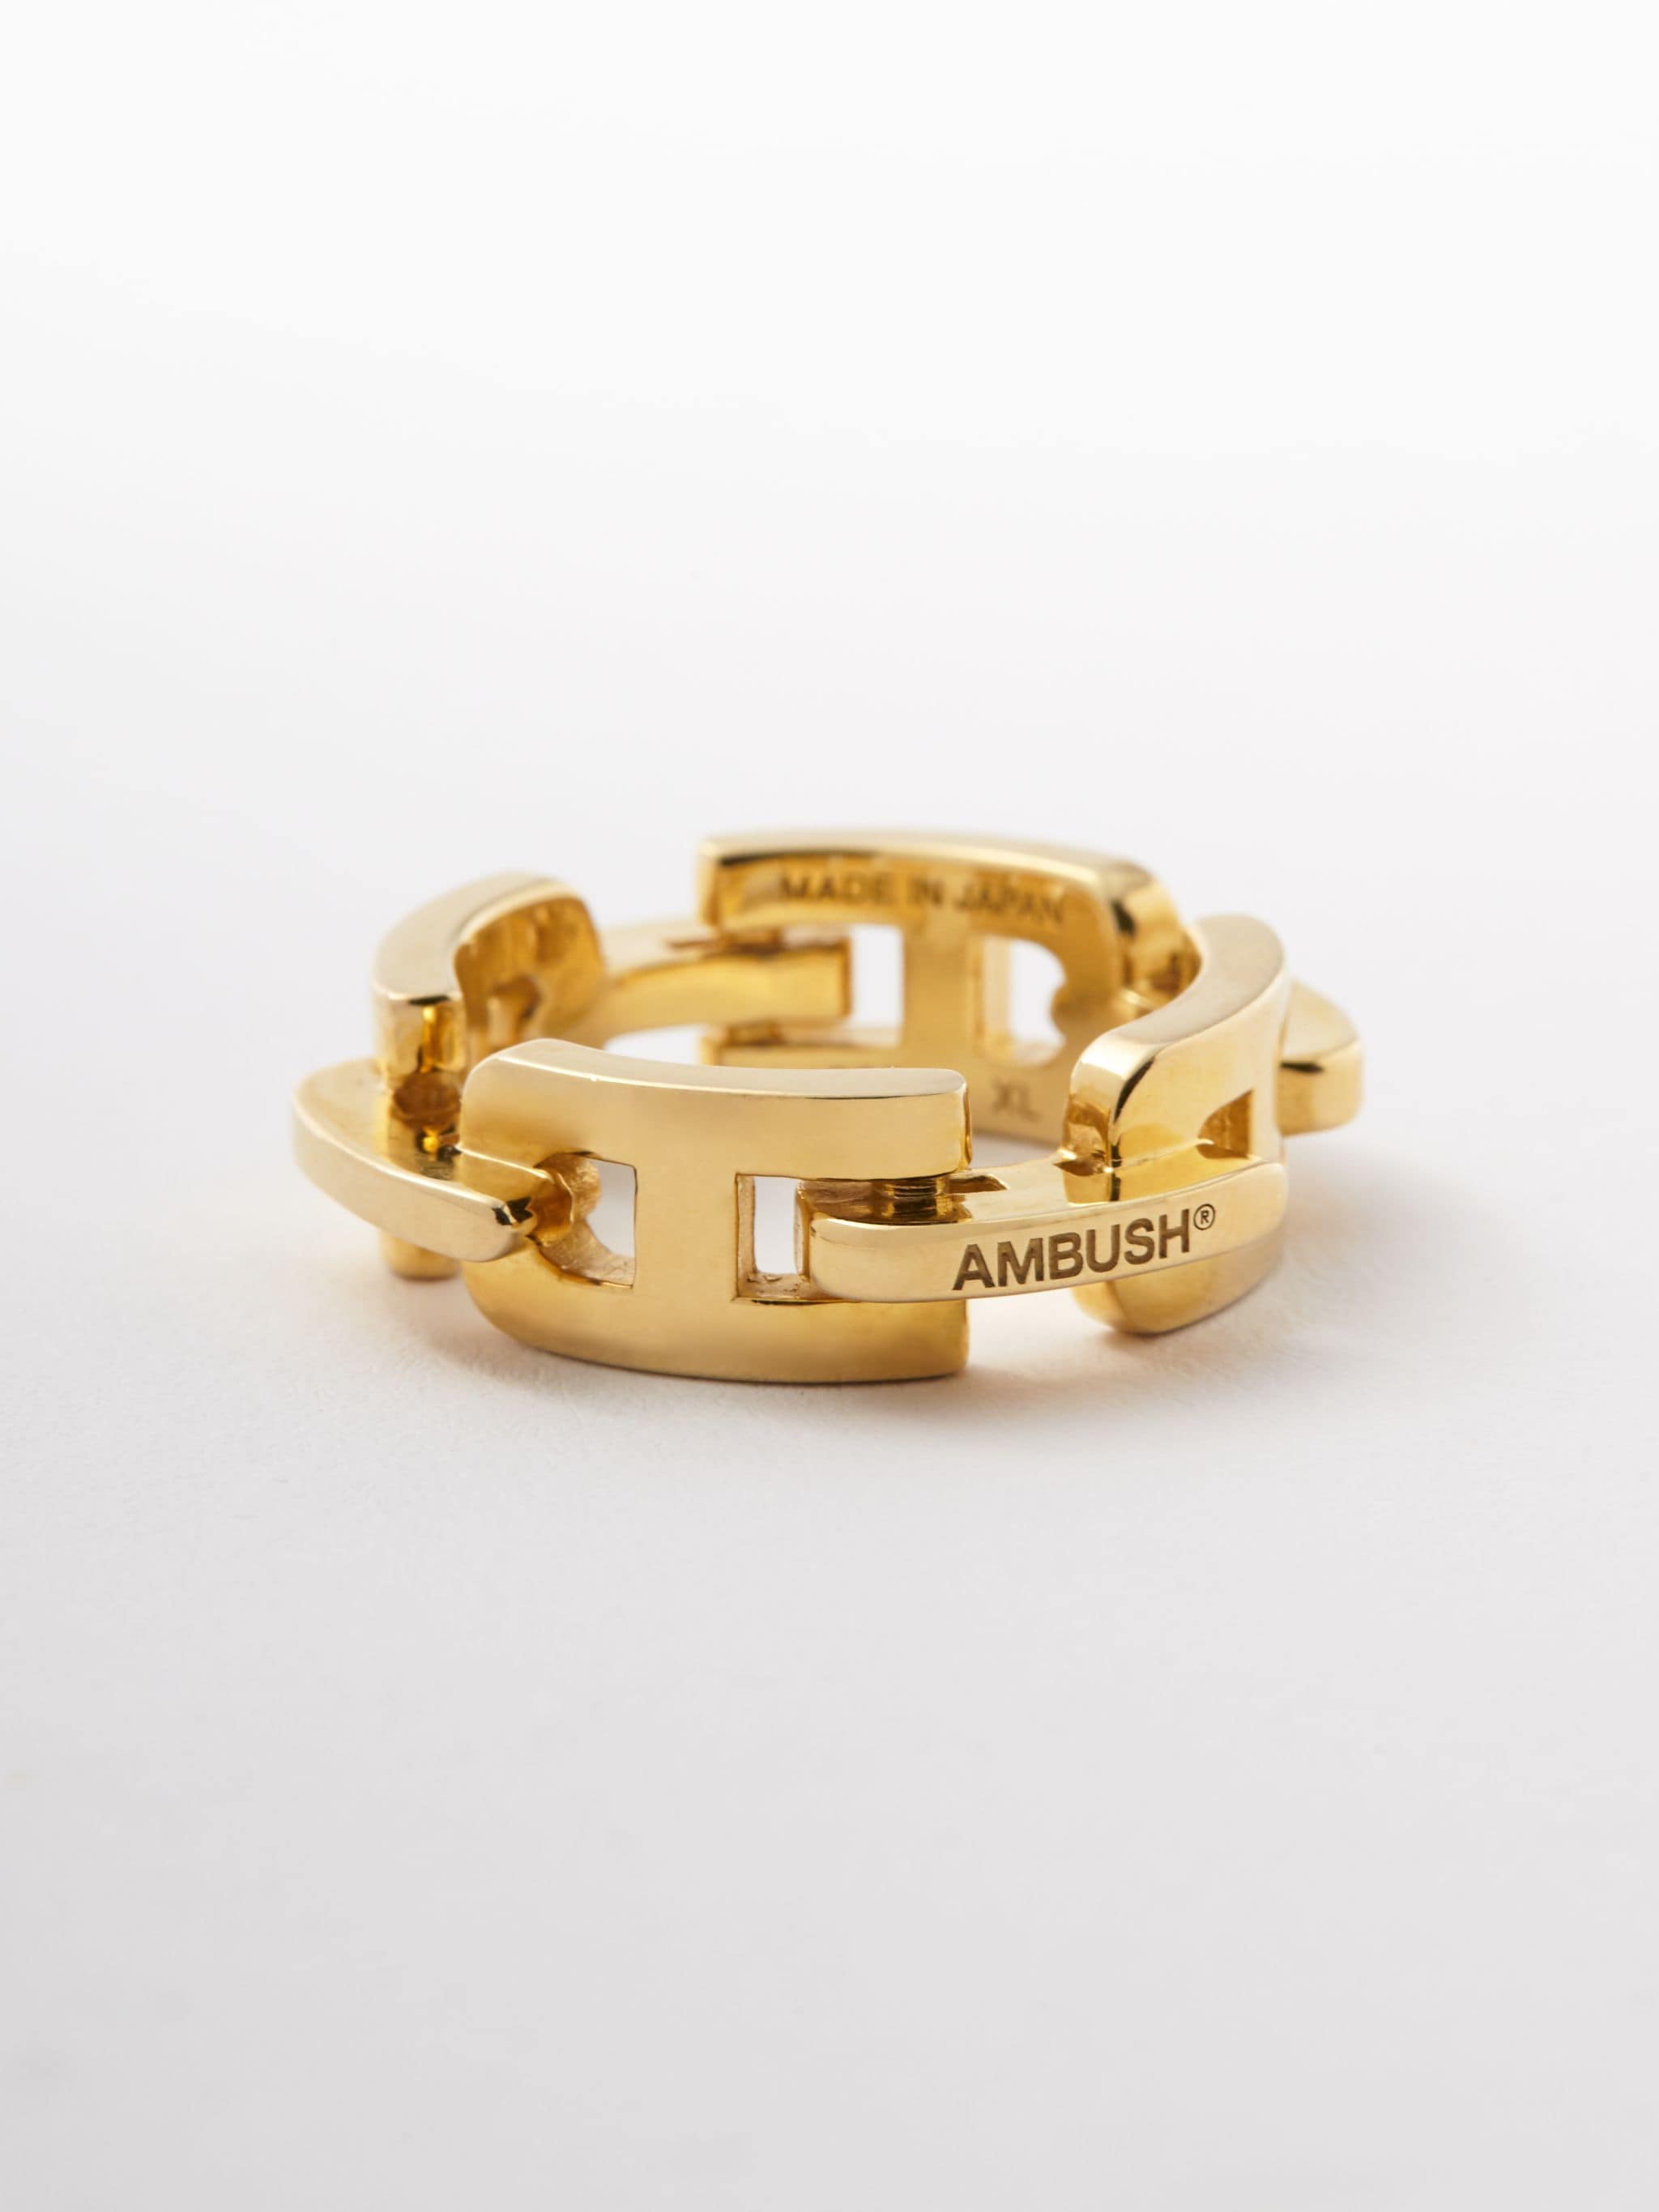 cartier chain ring